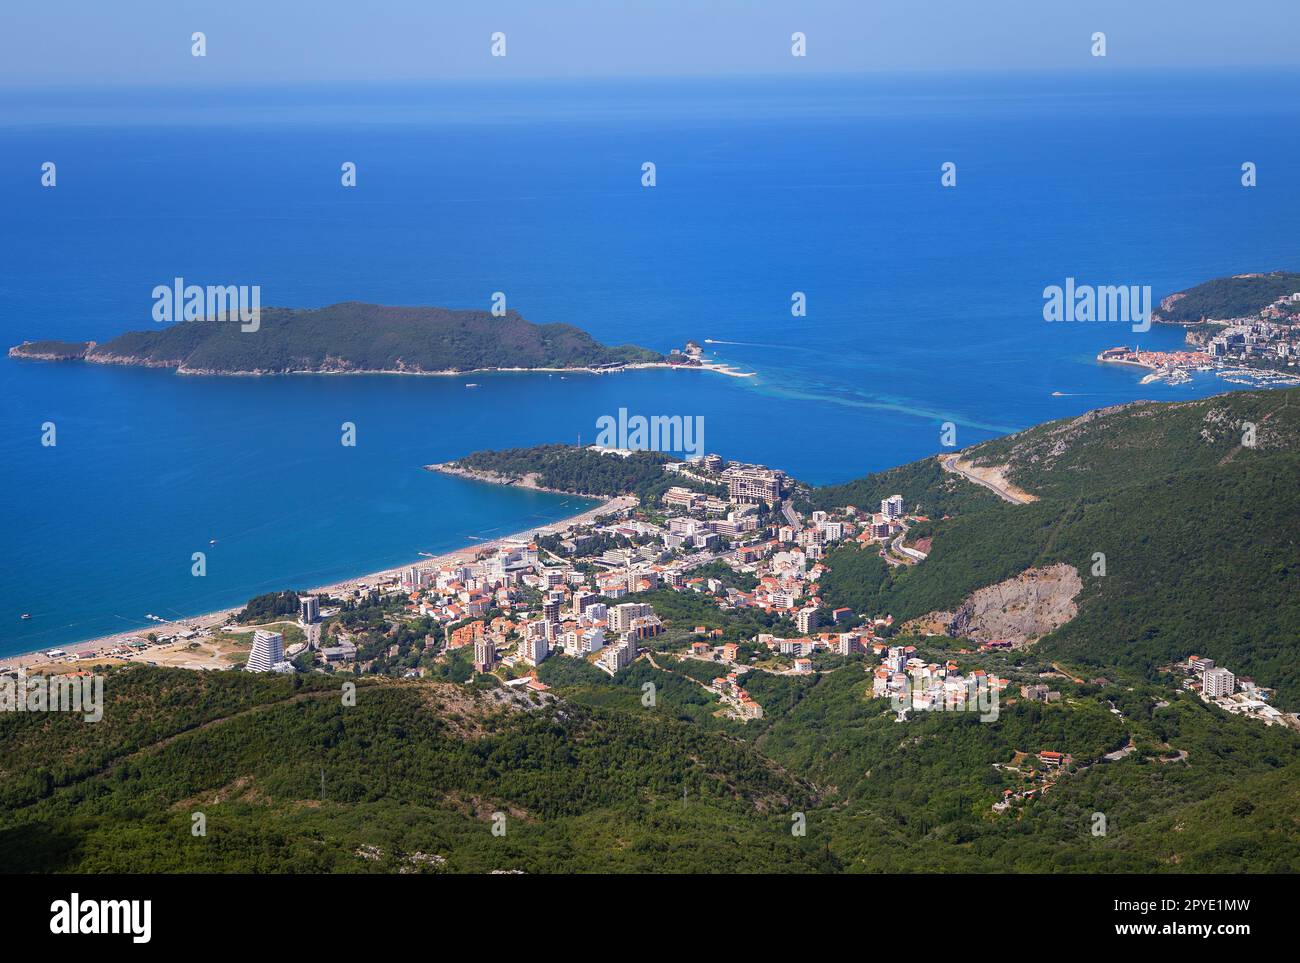 View of the city from the top of the mountain road. View of the coast and the city of Budva Riviera. Montenegro, Balkans, Adriatic Sea, Europe. Stock Photo